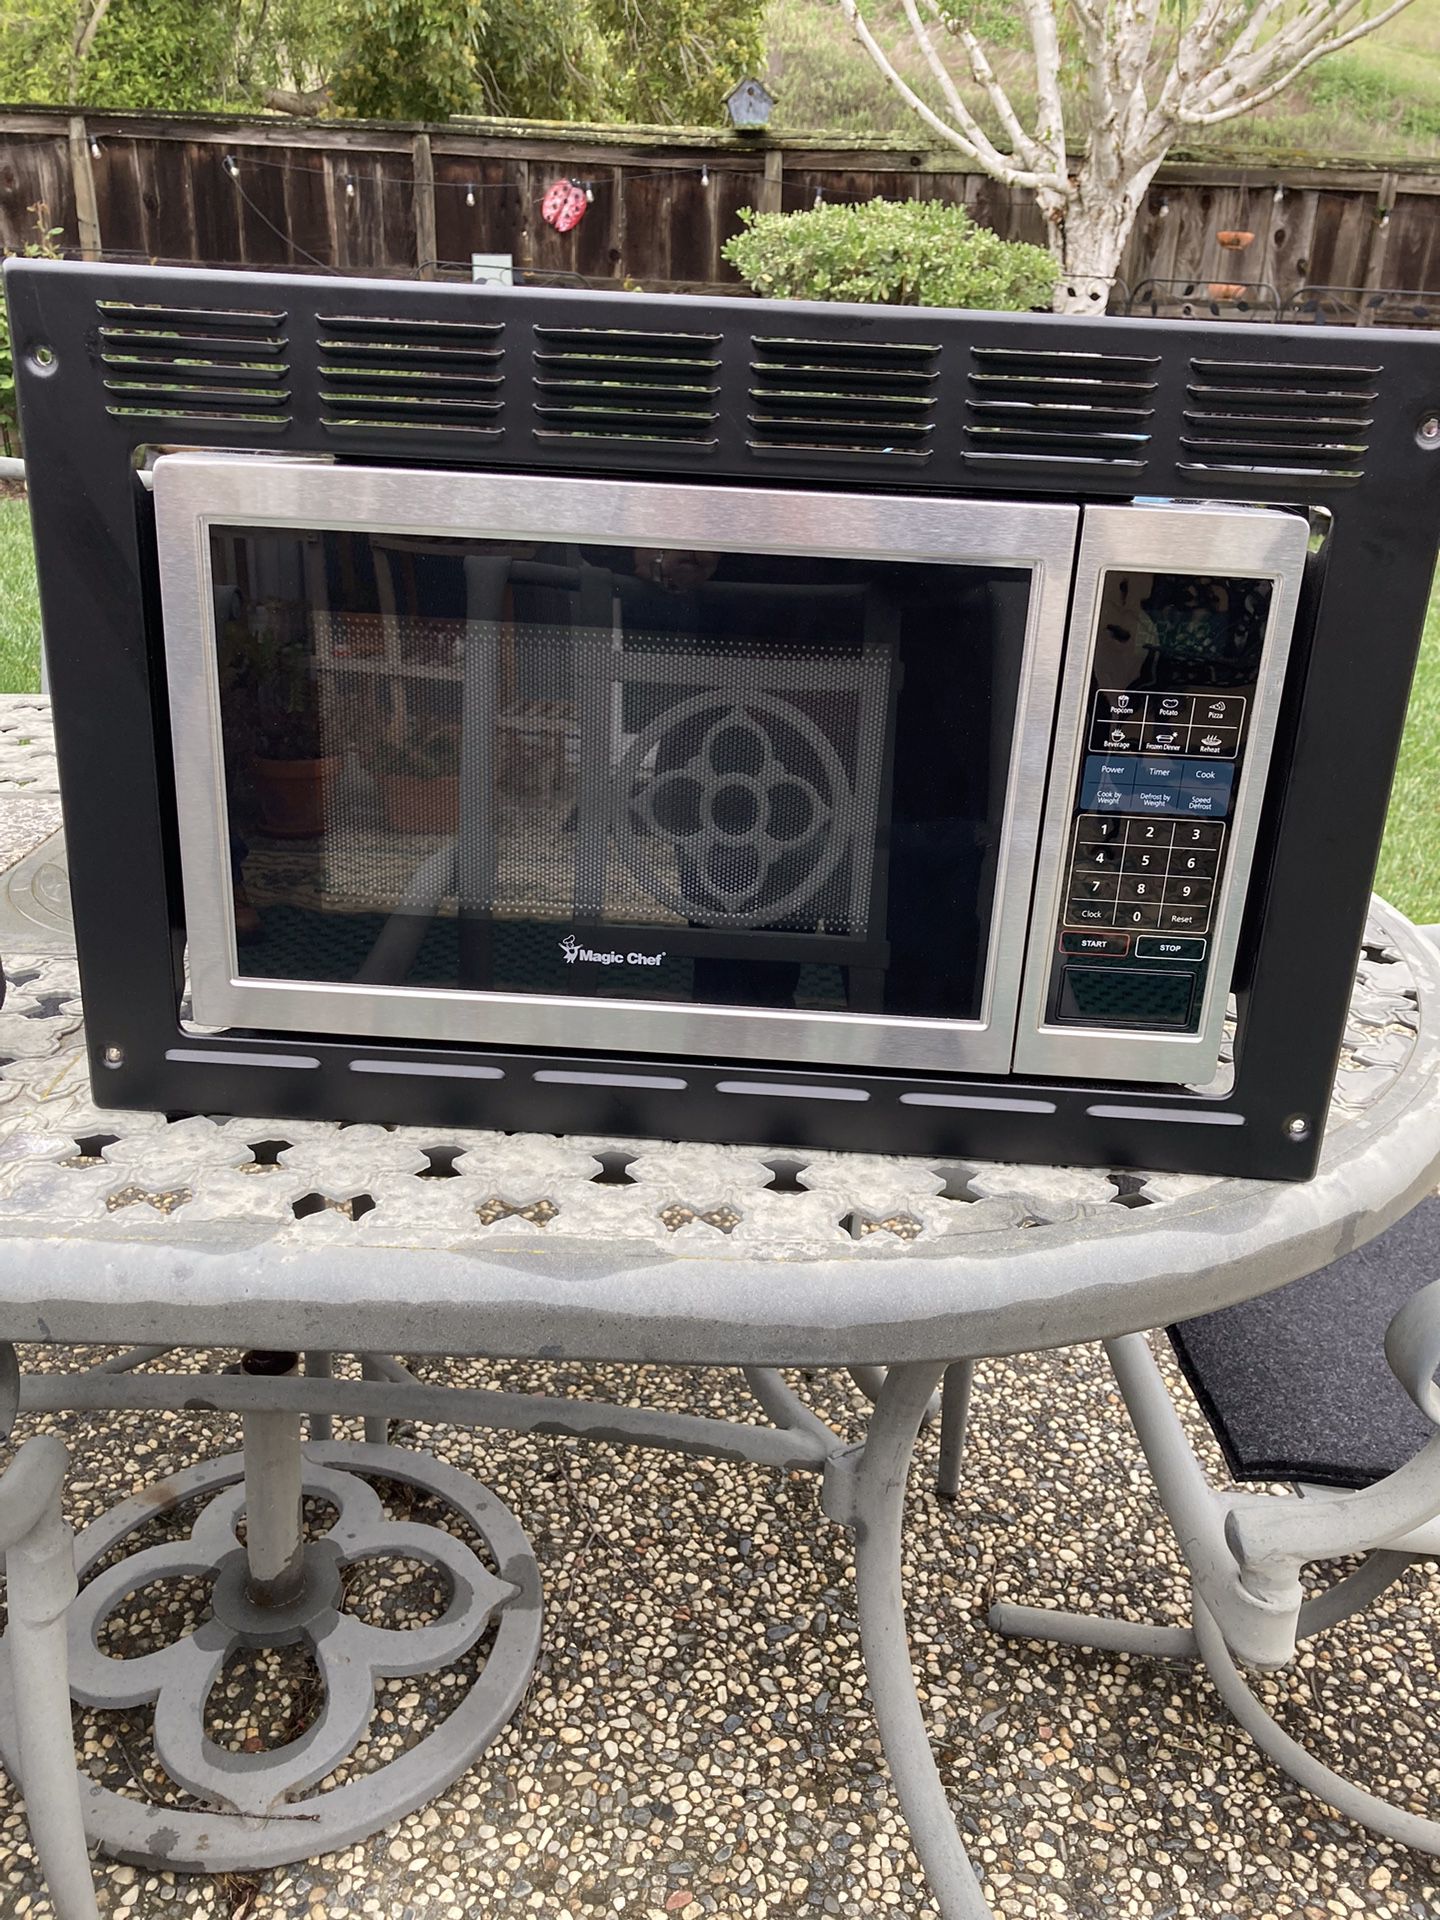 New Microwave Out Of Travel Trailer